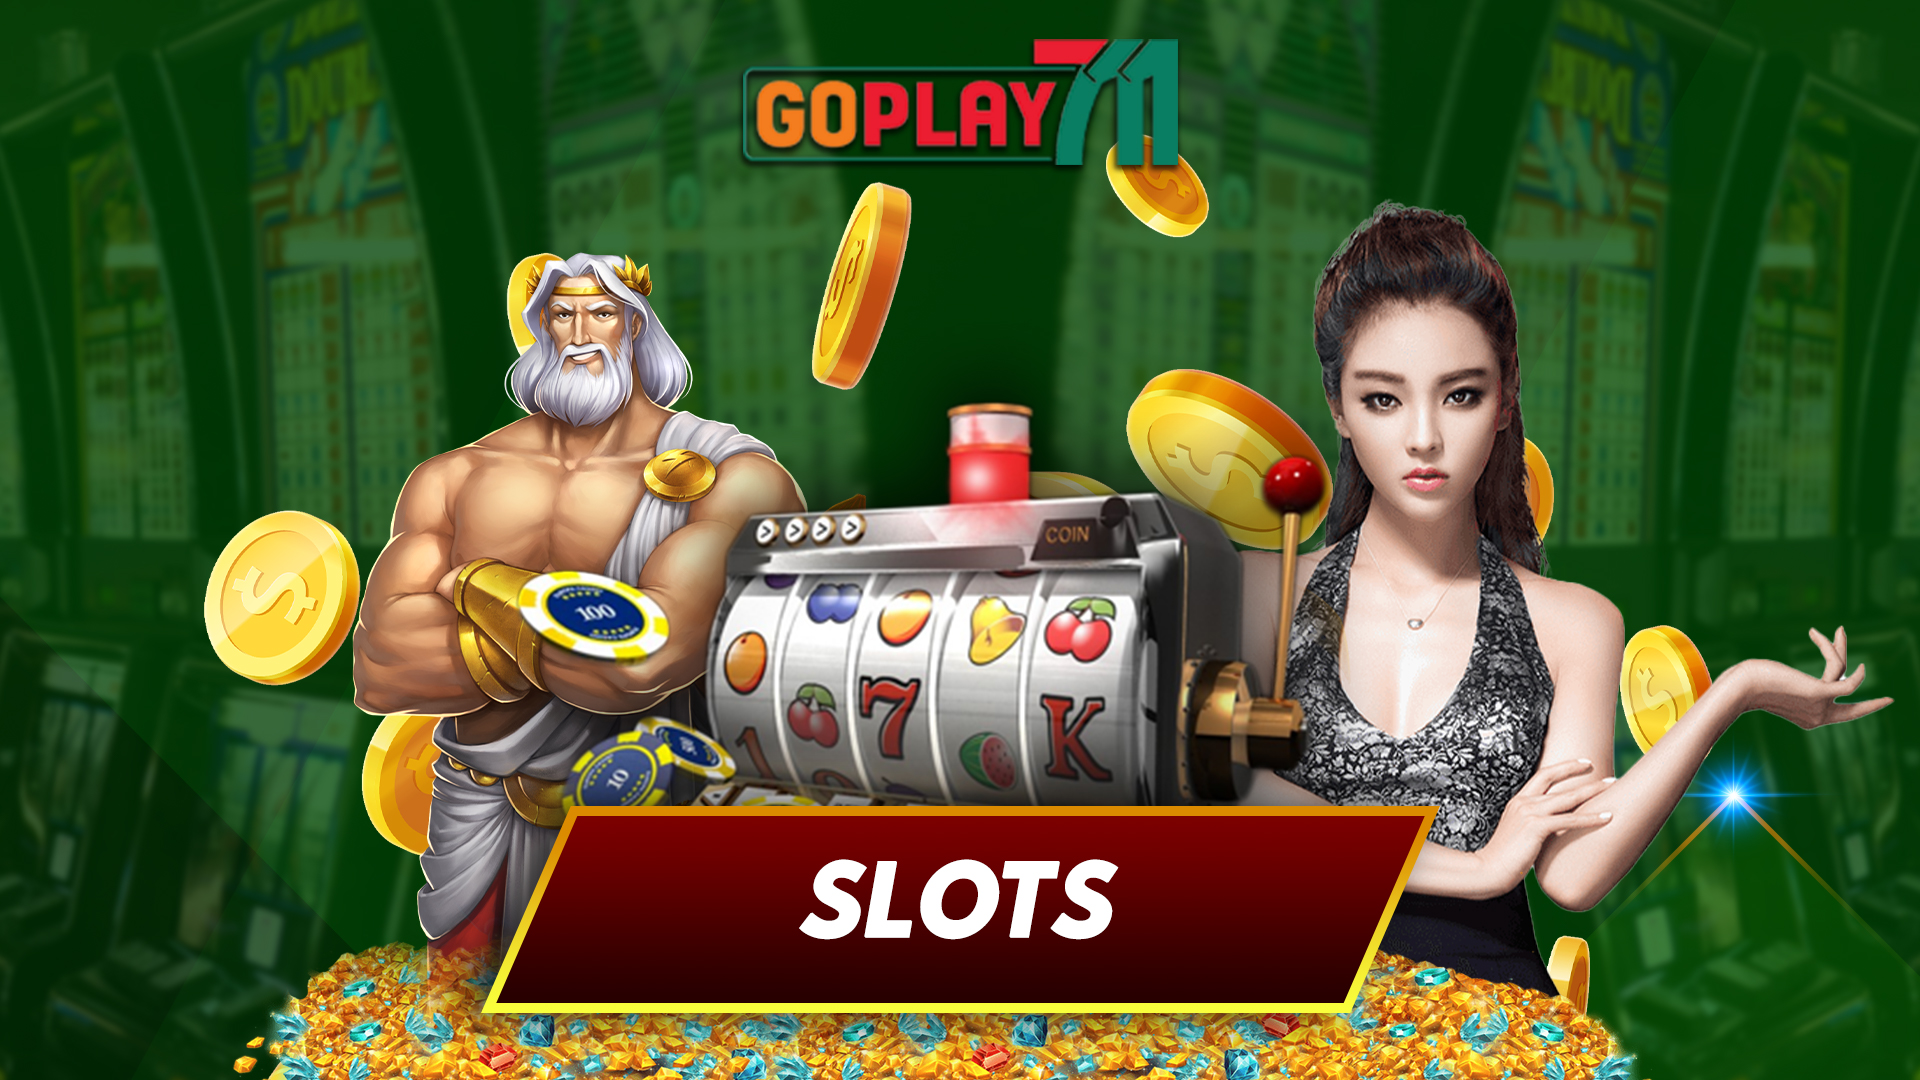 DISCOVER THE BEST SLOTS IN SINGAPORE AT GOPLAY711SG